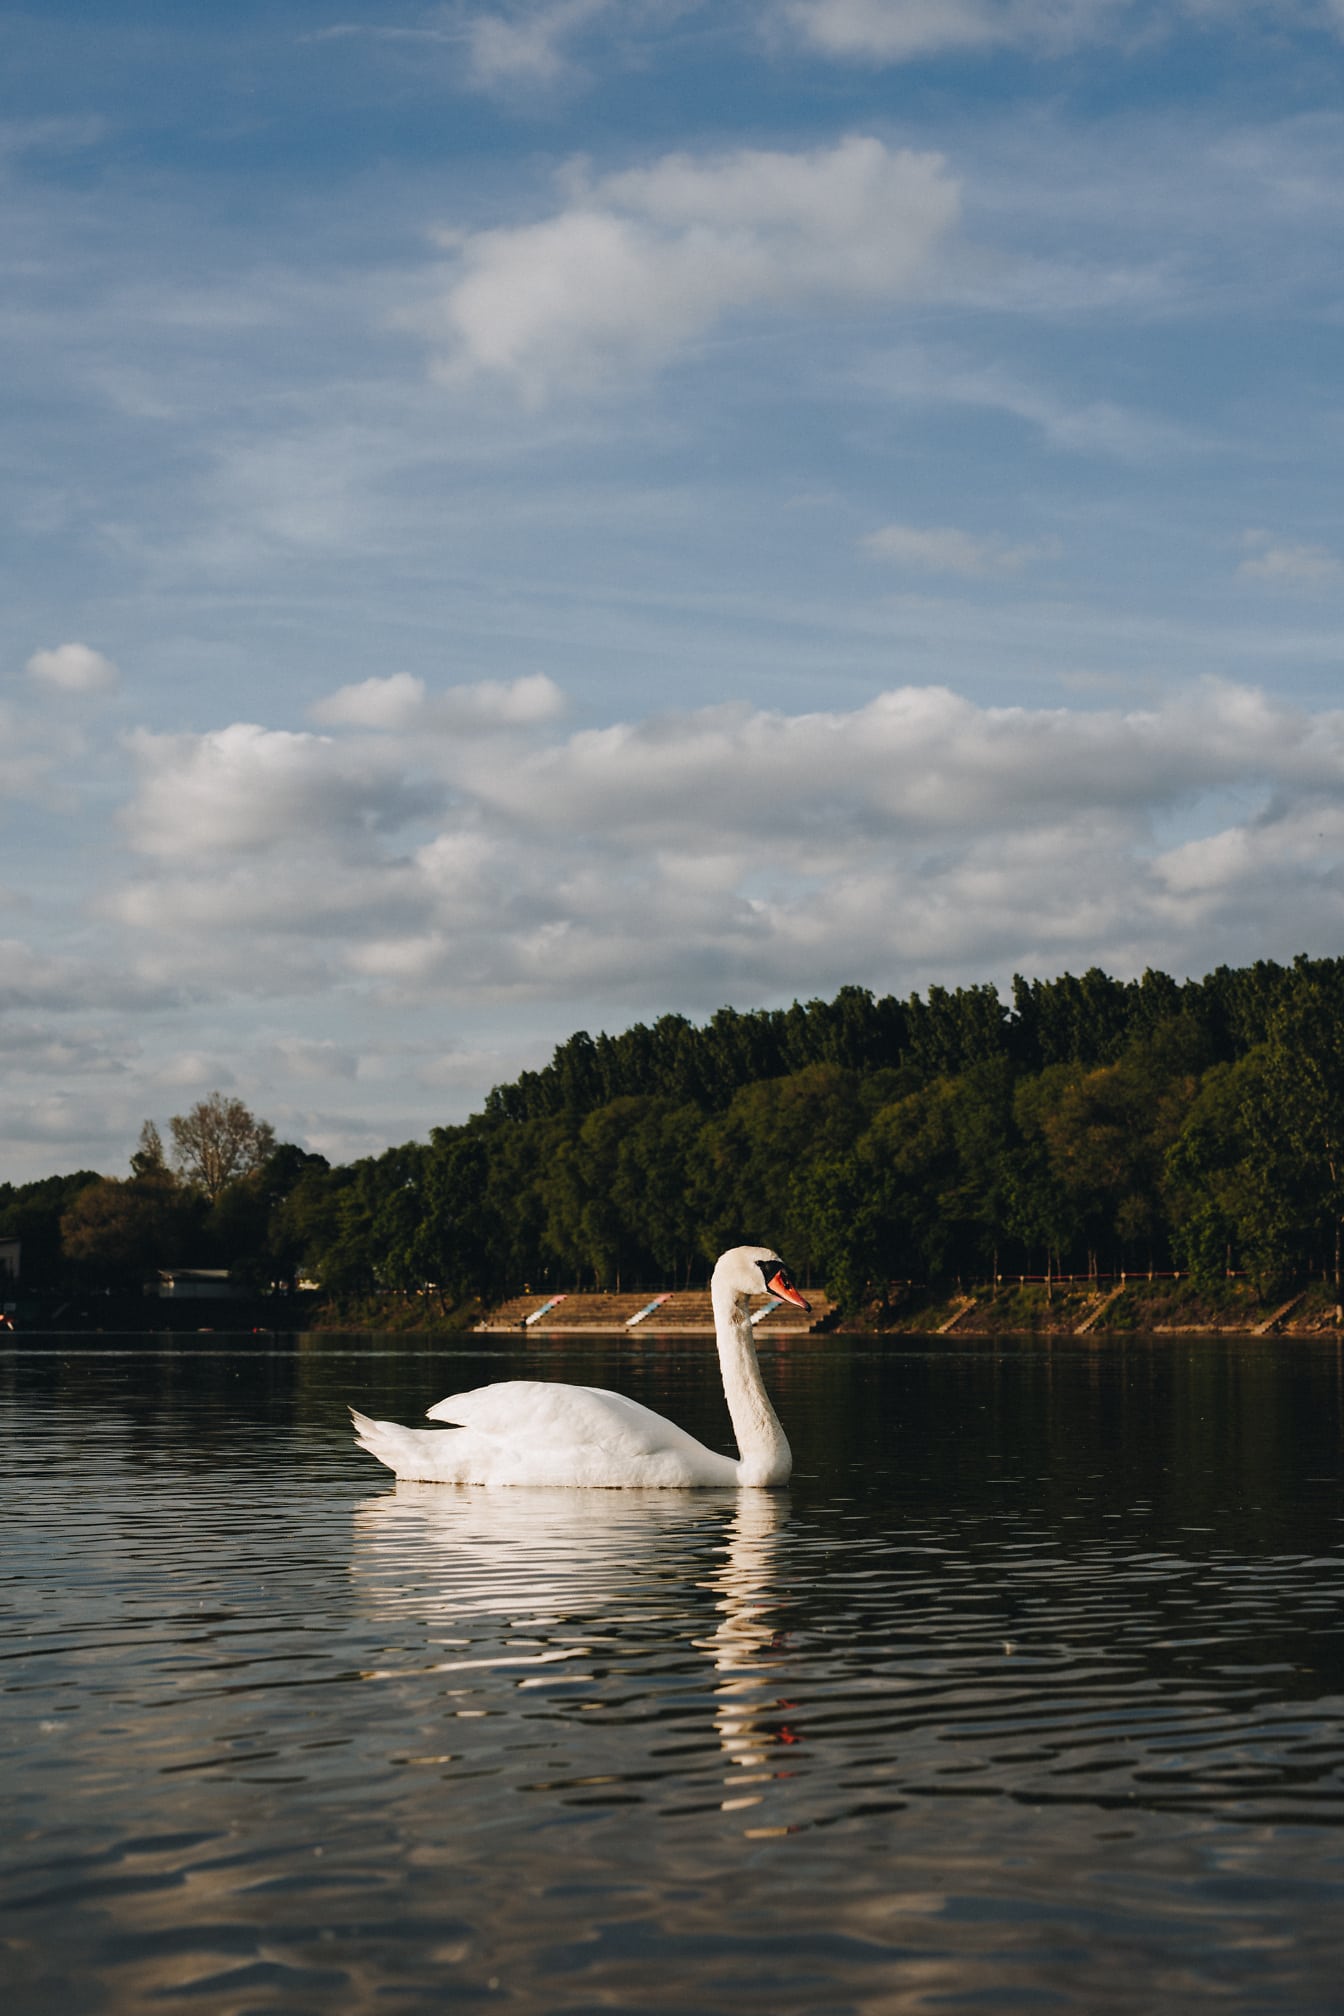 Side view of young swan swimming on calm lake